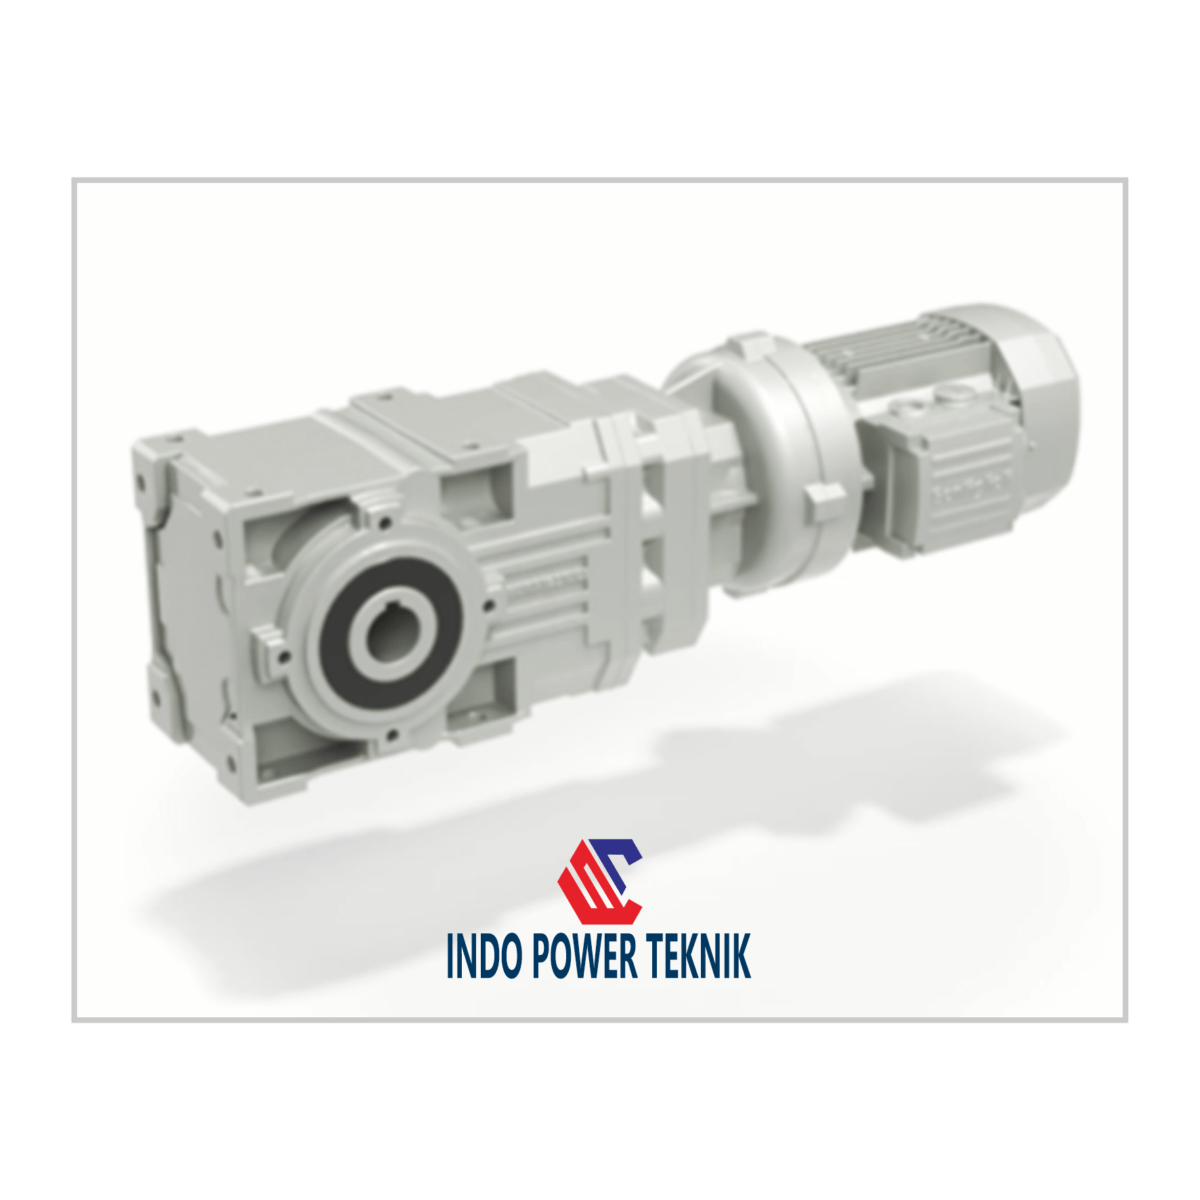 INDO POWER TEKNIK helical-bevel BONFIGLIOLI Helical Bevel Gearmotor ALL CATEGORIES GEARBOXS  right angle helical gears right angle gear motors jual Gearbox bonfiglioli type w jual Gearbox bonfiglioli type vf jual Gearbox bonfiglioli type ta jual Gearbox bonfiglioli type s jual Gearbox bonfiglioli type ran jual Gearbox bonfiglioli type hdp Jual Gearbox bonfiglioli type F jual Gearbox bonfiglioli type c jual Gearbox bonfiglioli type as jual Gearbox bonfiglioli type a jual gearbox bonfiglioli jual Gearbox bonfiglioili planetary jual gear motor bonfiglioli type a jual gear motor bonfiglioli jual bonfiglioli type ran jual bonfiglioli type HDPE jual Bonfiglioli Planetary Gear Motor jual bonfiglioli Indonesia jual bonfiglioli gearbox jual bonfiglioli gear motor Jual Bonfiglioli jual bevel helical gearbox jual bevel helical gear motor jual bevel helical gear industrial gear motor indo power teknik helical gearmotor helical geared motor helical gearbox helical bevel gearmotor bonfiglioli helical bevel gearmotor helical bevel gearbox helical bevel gear unit helical bevel gear motor helical bevel gear helical bevel helical and bevel gear helical gearmotor gearbox bonfiglioli gearbox electric motor bonfiglioli helical gearmotor bevel Bonfiglioli Helical Bevel Gearmotor yogyakarta Bonfiglioli Helical Bevel Gearmotor sumatra utara Bonfiglioli Helical Bevel Gearmotor sumatra selatan Bonfiglioli Helical Bevel Gearmotor sumatra barat Bonfiglioli Helical Bevel Gearmotor sulawesi utara Bonfiglioli Helical Bevel Gearmotor sulawesi tenggara Bonfiglioli Helical Bevel Gearmotor sulawesi tengah Bonfiglioli Helical Bevel Gearmotor sulawesi selatan Bonfiglioli Helical Bevel Gearmotor sulawesi barat Bonfiglioli Helical Bevel Gearmotor riau Bonfiglioli Helical Bevel Gearmotor papua Bonfiglioli Helical Bevel Gearmotor nusa tenggara timur Bonfiglioli Helical Bevel Gearmotor nusa tenggara barat Bonfiglioli Helical Bevel Gearmotor maluku utara Bonfiglioli Helical Bevel Gearmotor maluku Bonfiglioli Helical Bevel Gearmotor lampung Bonfiglioli Helical Bevel Gearmotor kepulauan riau Bonfiglioli Helical Bevel Gearmotor kepulauan bangka belitung Bonfiglioli Helical Bevel Gearmotor kalimantan utara Bonfiglioli Helical Bevel Gearmotor kalimantan timur Bonfiglioli Helical Bevel Gearmotor kalimantan tengah Bonfiglioli Helical Bevel Gearmotor kalimantan selatan Bonfiglioli Helical Bevel Gearmotor kalimantan barat Bonfiglioli Helical Bevel Gearmotor jawa timur Bonfiglioli Helical Bevel Gearmotor jawa tengah Bonfiglioli Helical Bevel Gearmotor jawa barat Bonfiglioli Helical Bevel Gearmotor jambi Bonfiglioli Helical Bevel Gearmotor jakarta Bonfiglioli Helical Bevel Gearmotor gorontalo Bonfiglioli Helical Bevel Gearmotor bengkulu Bonfiglioli Helical Bevel Gearmotor banten Bonfiglioli Helical Bevel Gearmotor bali Bonfiglioli Helical Bevel Gearmotor aceh bonfiglioli helical bevel gearmotor bonfiglioli helical bevel bonfiglioli A series bonfiglioli bevel motor bevel helical gear unit bevel gearmotor bonfiglioli bevel gearmotor bevel gear motor agen bonfiglioli semarang agen bonfiglioli jawa tengah agen bonfiglioli jakarta A series helical gearmotor A series helical bevel A series gearmotor 